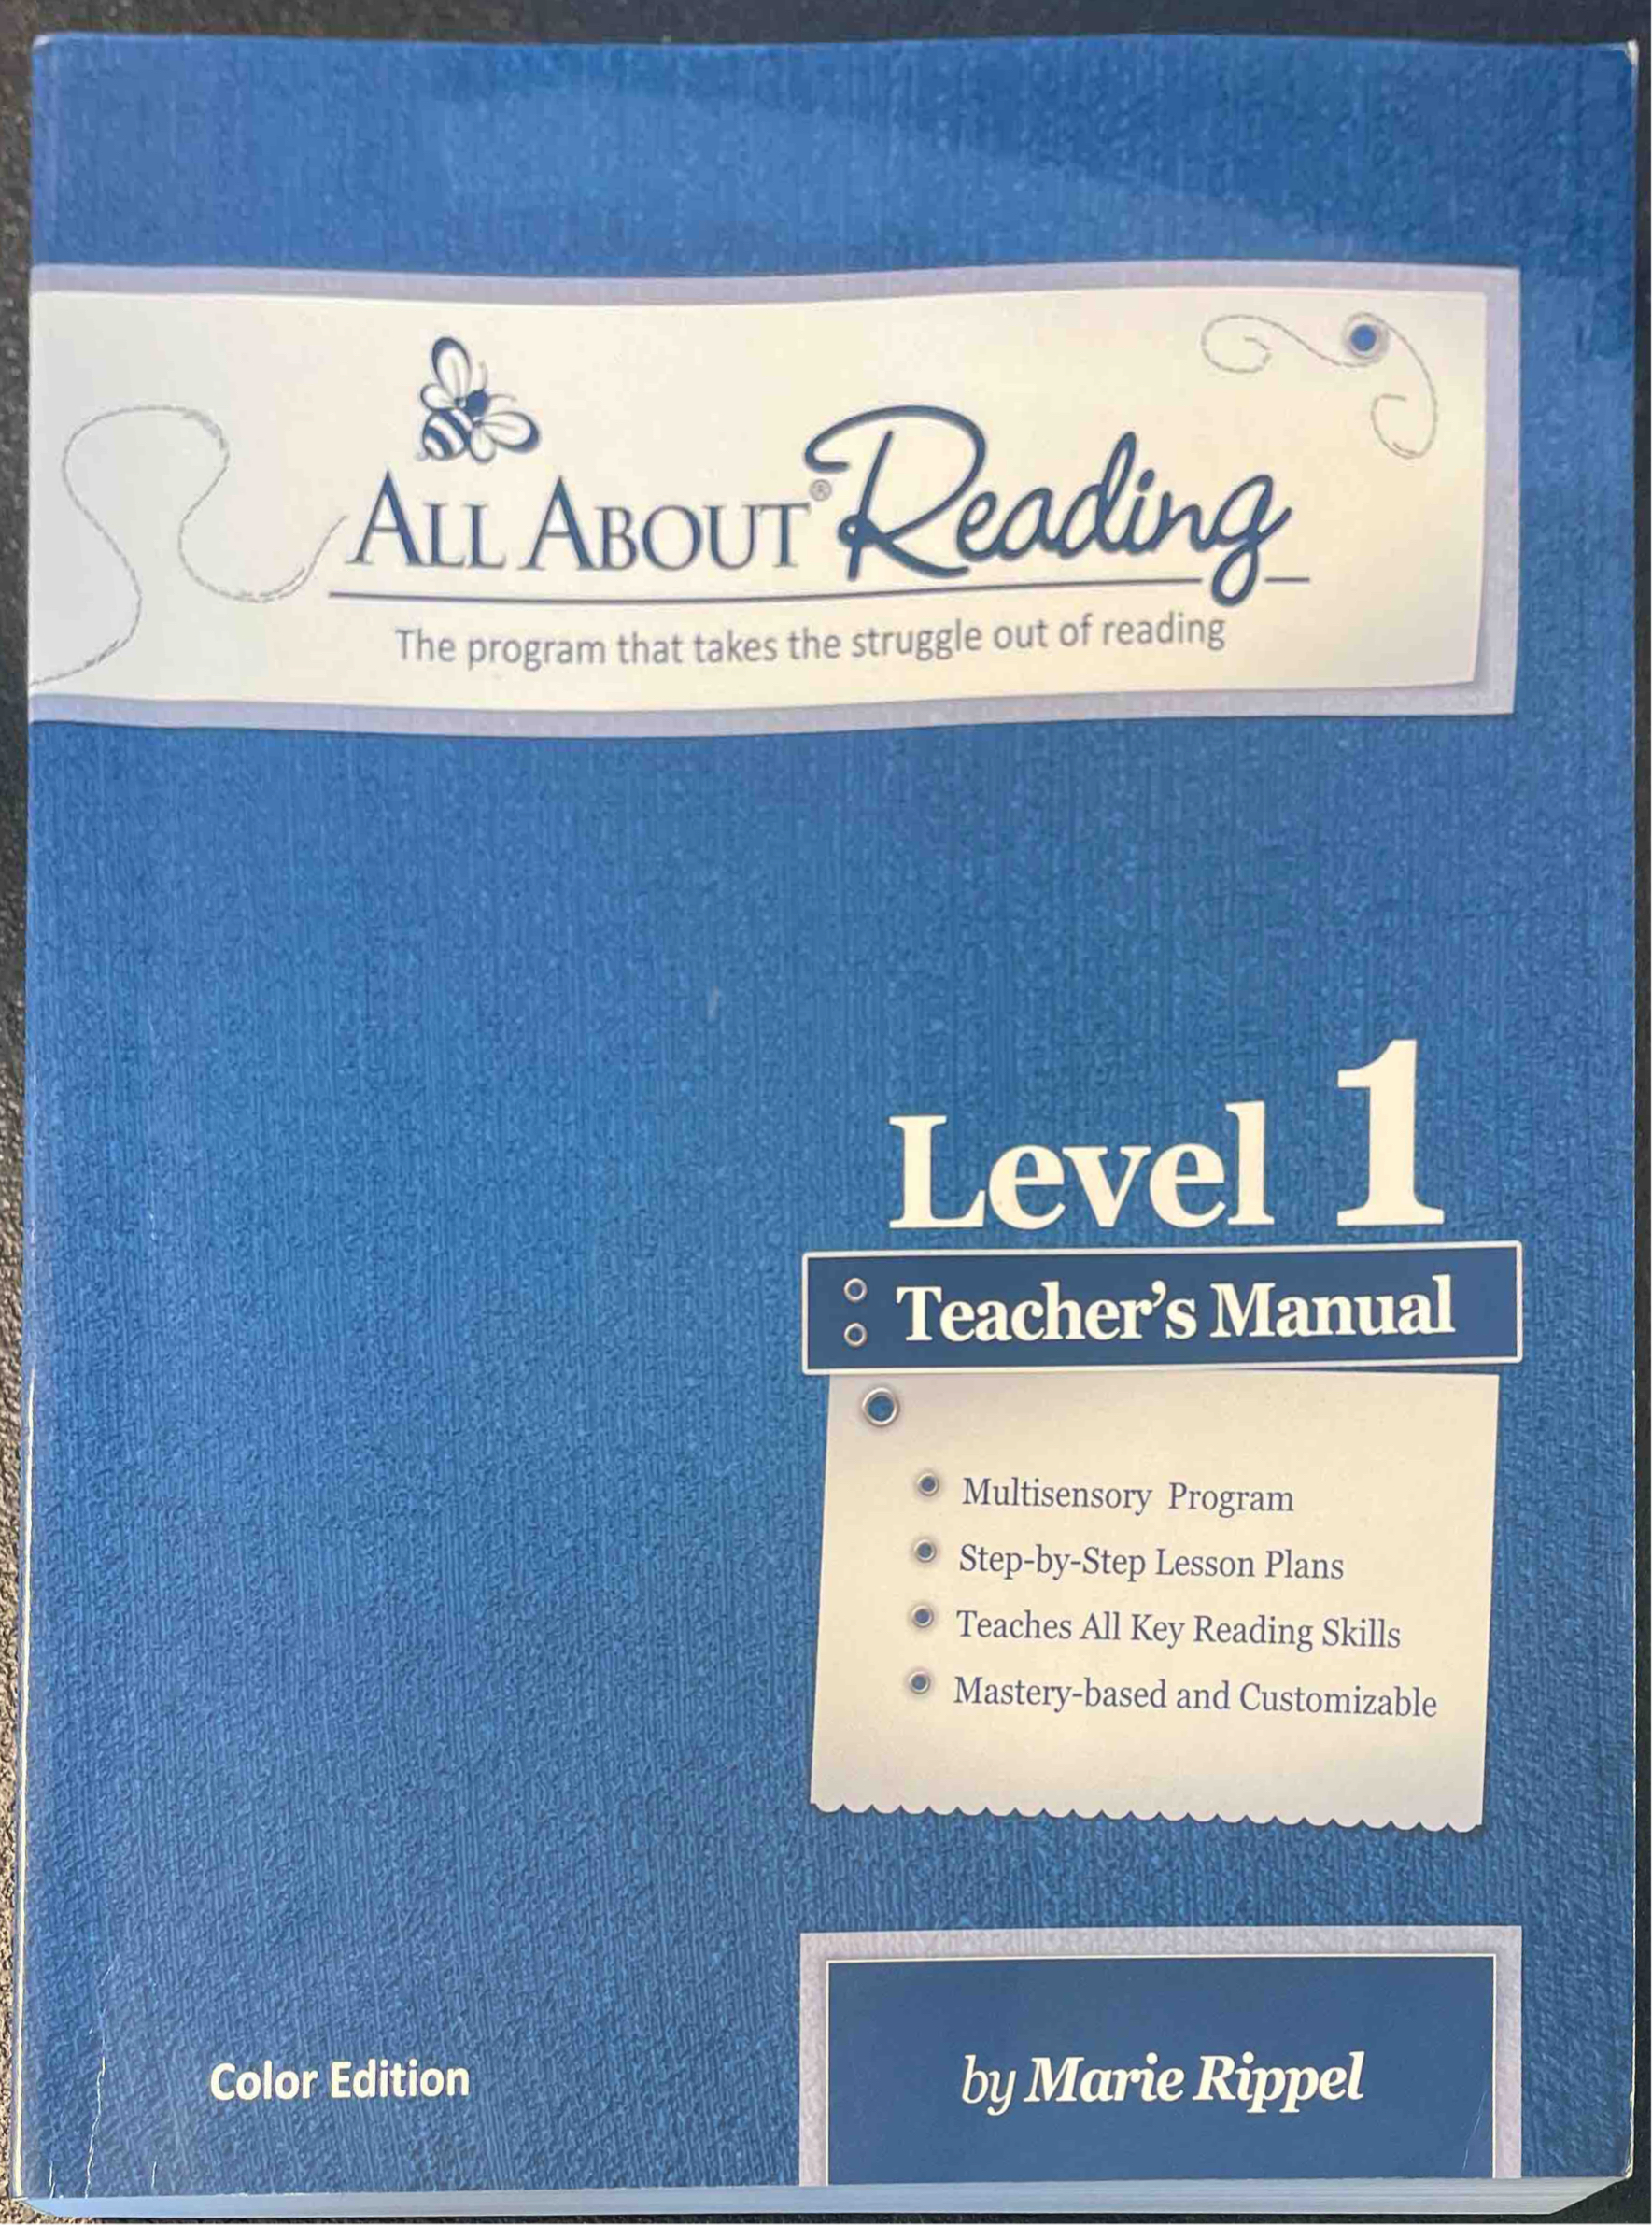 All About Reading Level 1 Teacher's Manual - Color Edition